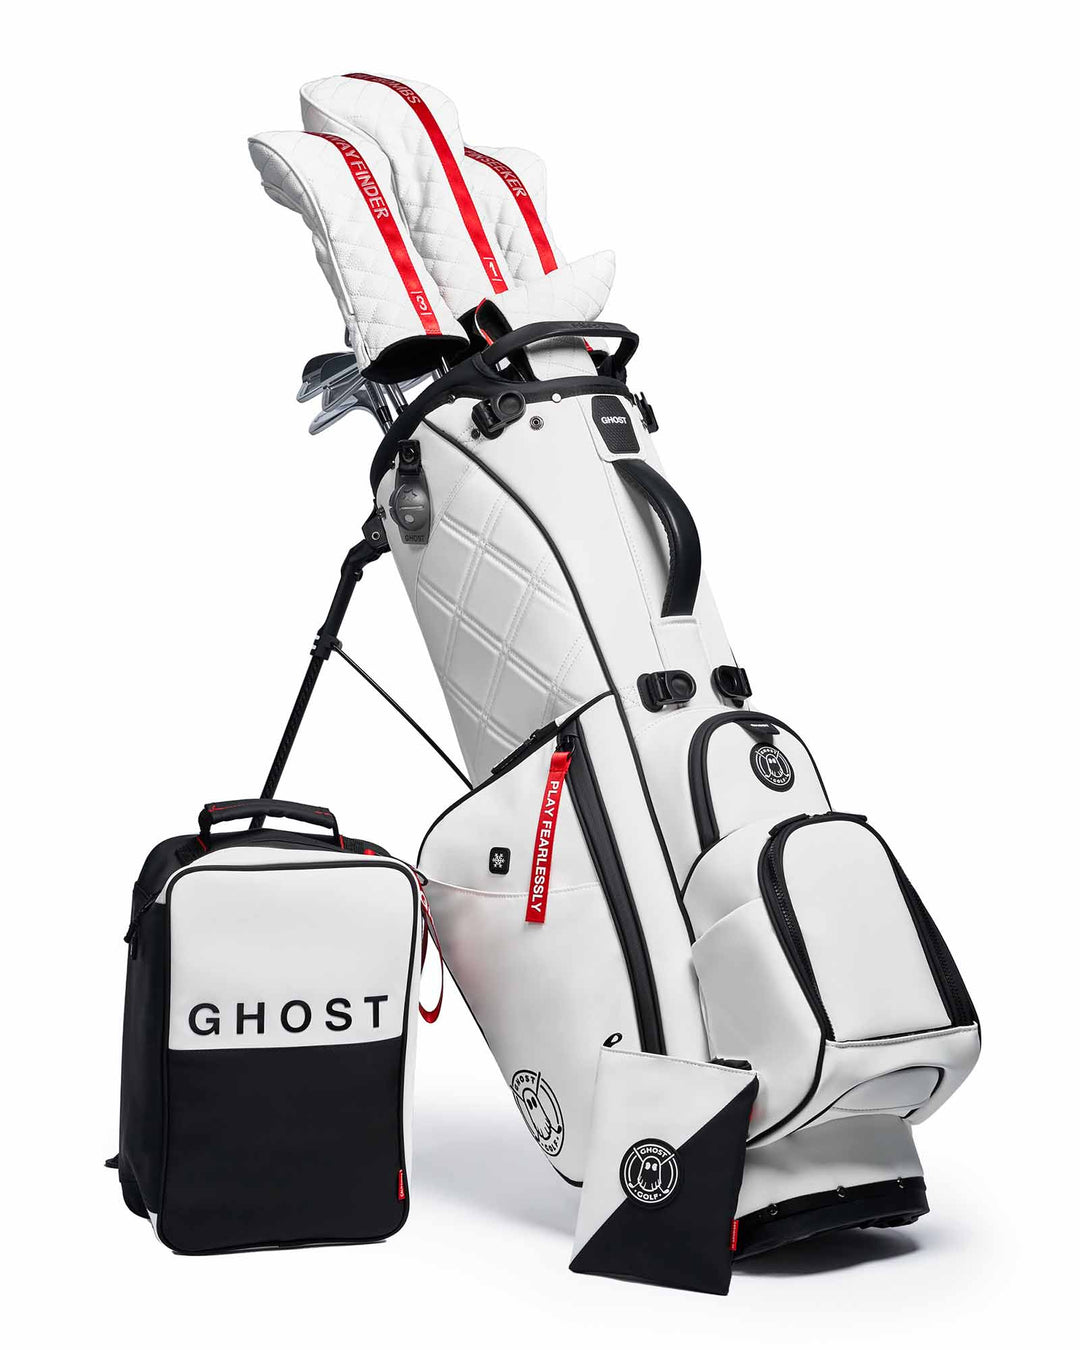 SAYA White Leather Golf Bag with Red Tags. Golf Clubs with White and Red Stripe Head Covers.  Black and White Shoe Bag and Pouch